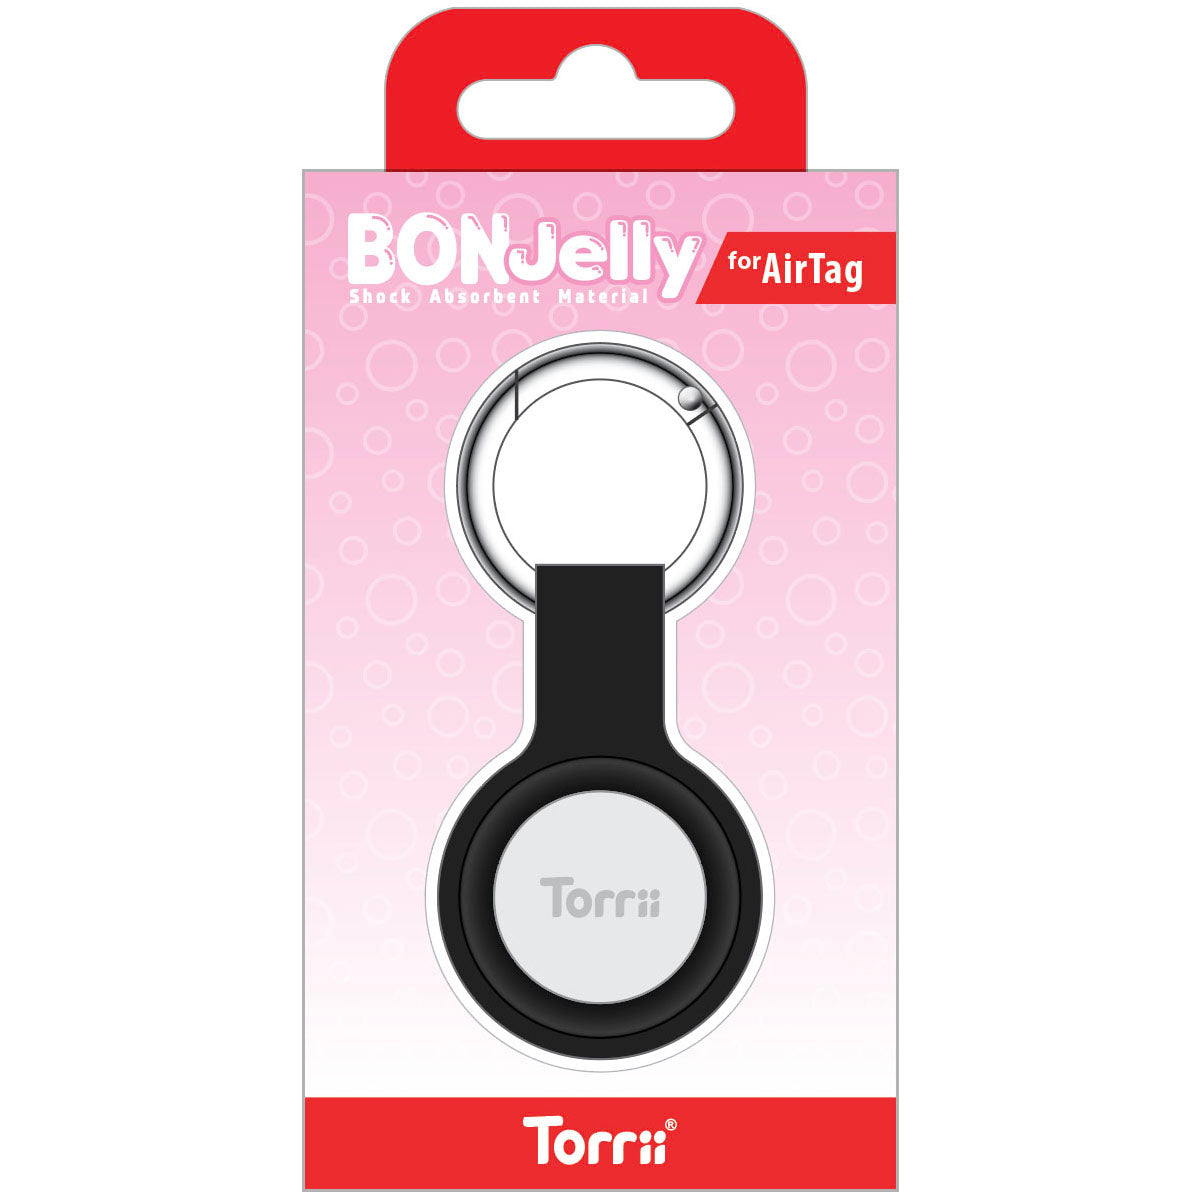 Torrii Bonjelly Silicone Key Ring For Apple Airtag - Black